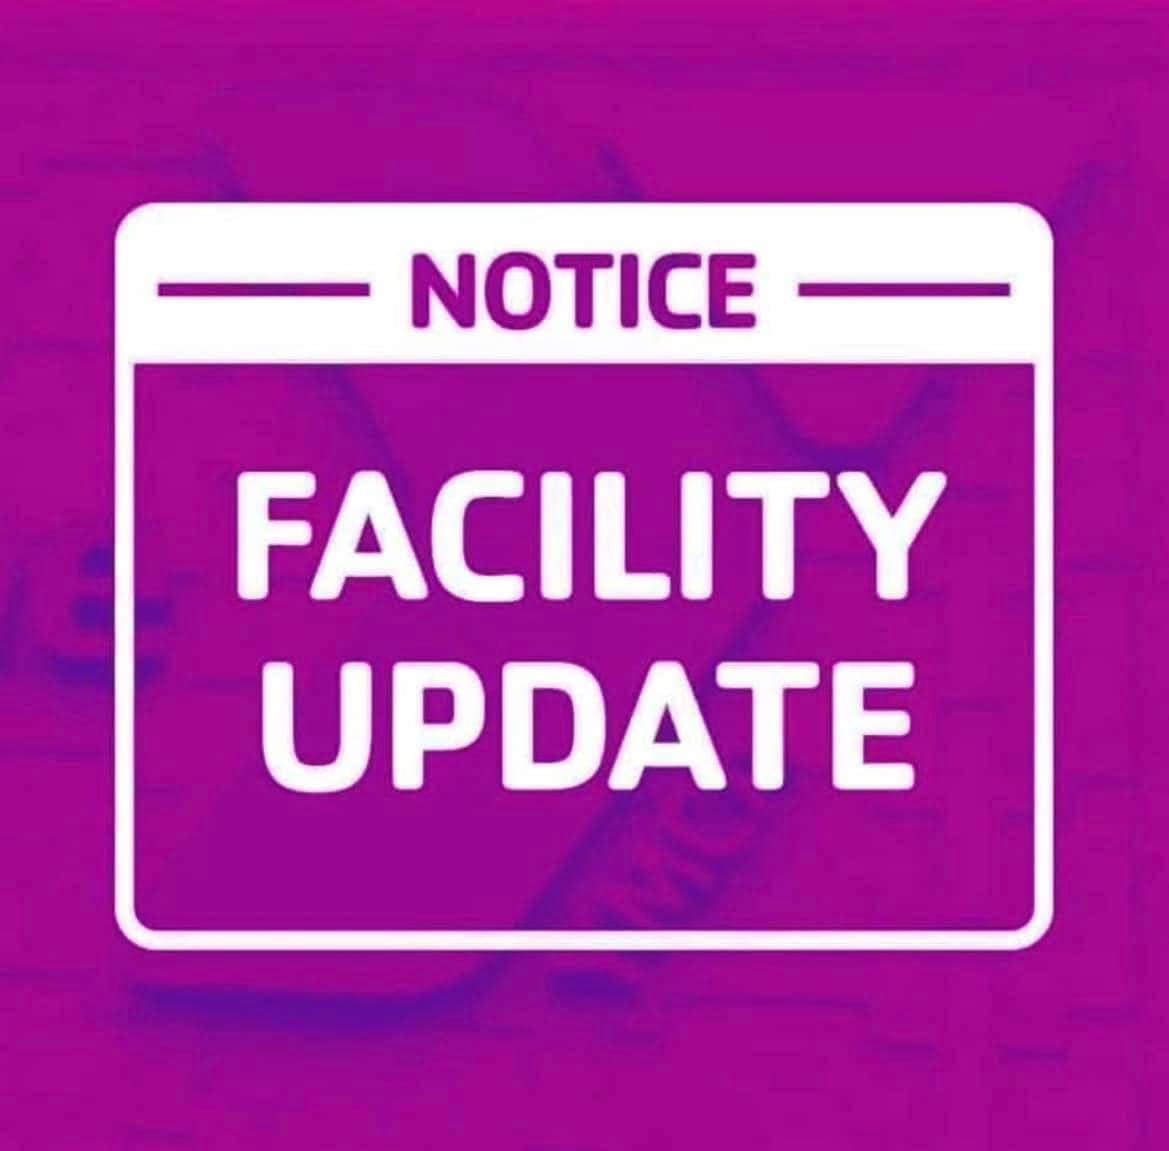 All Greater Austin YMCA centers are delaying opening to 12 PM (noon), Jan 15th, due to icy roads and winter warnings. Safety first! 🌨️❄️ Check AustinYMCA.org for the latest updates. Thanks for understanding! 🙏 #StaySafe